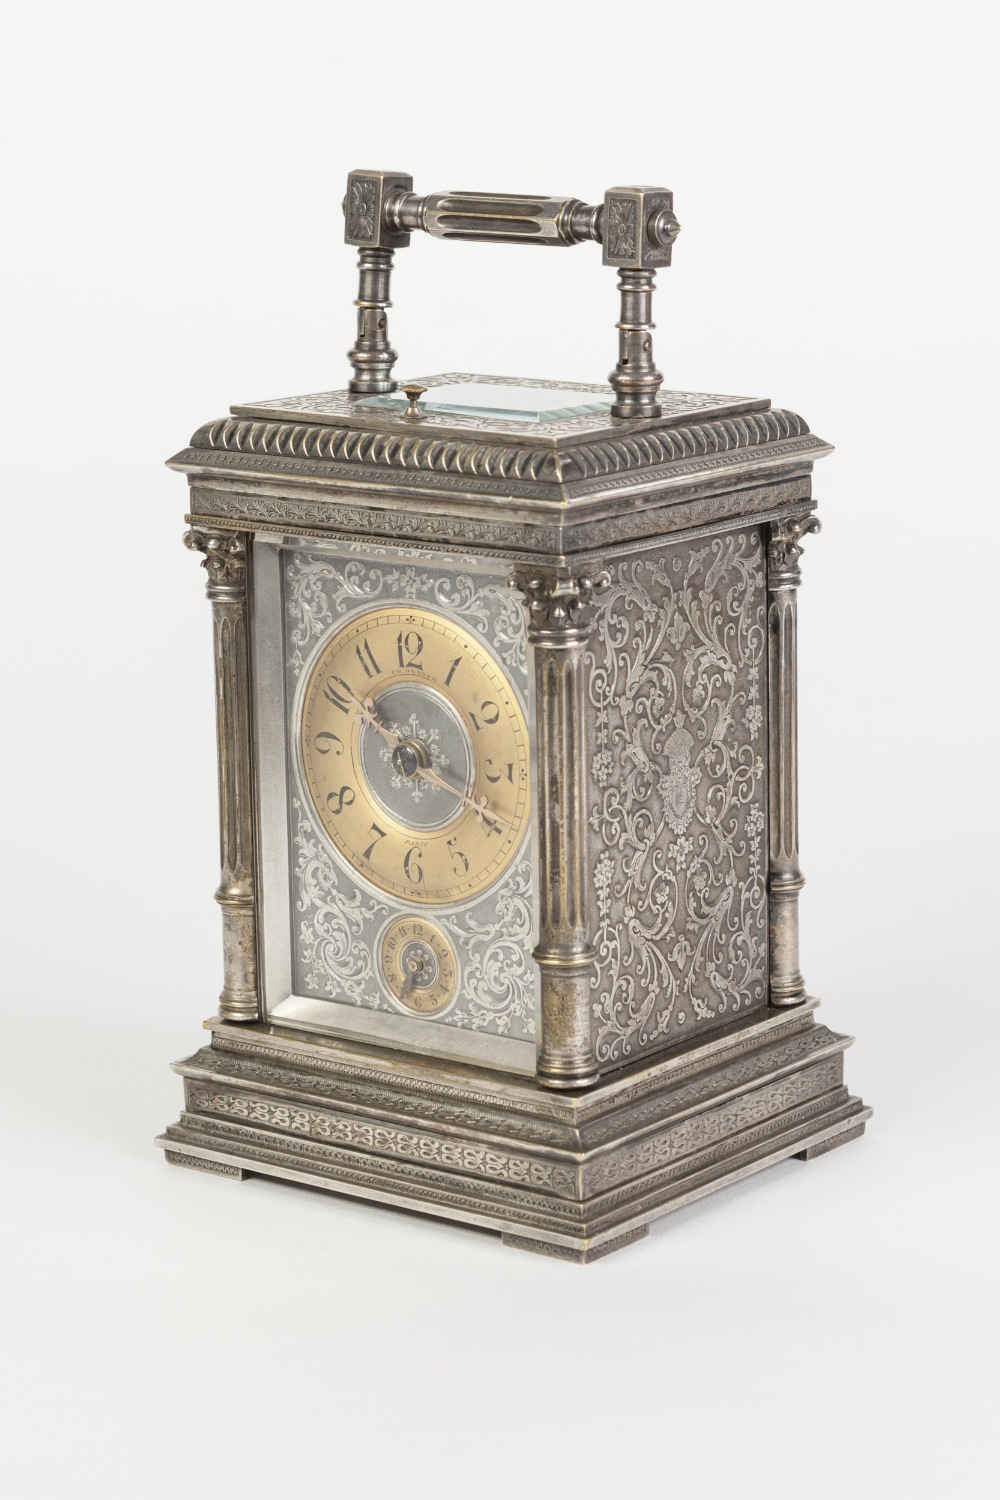 CHARLES H JOSEPH, PARIS (1852 - 1935) PETITE SONNERIE CARRIAGE CLOCK striking on two gongs, with